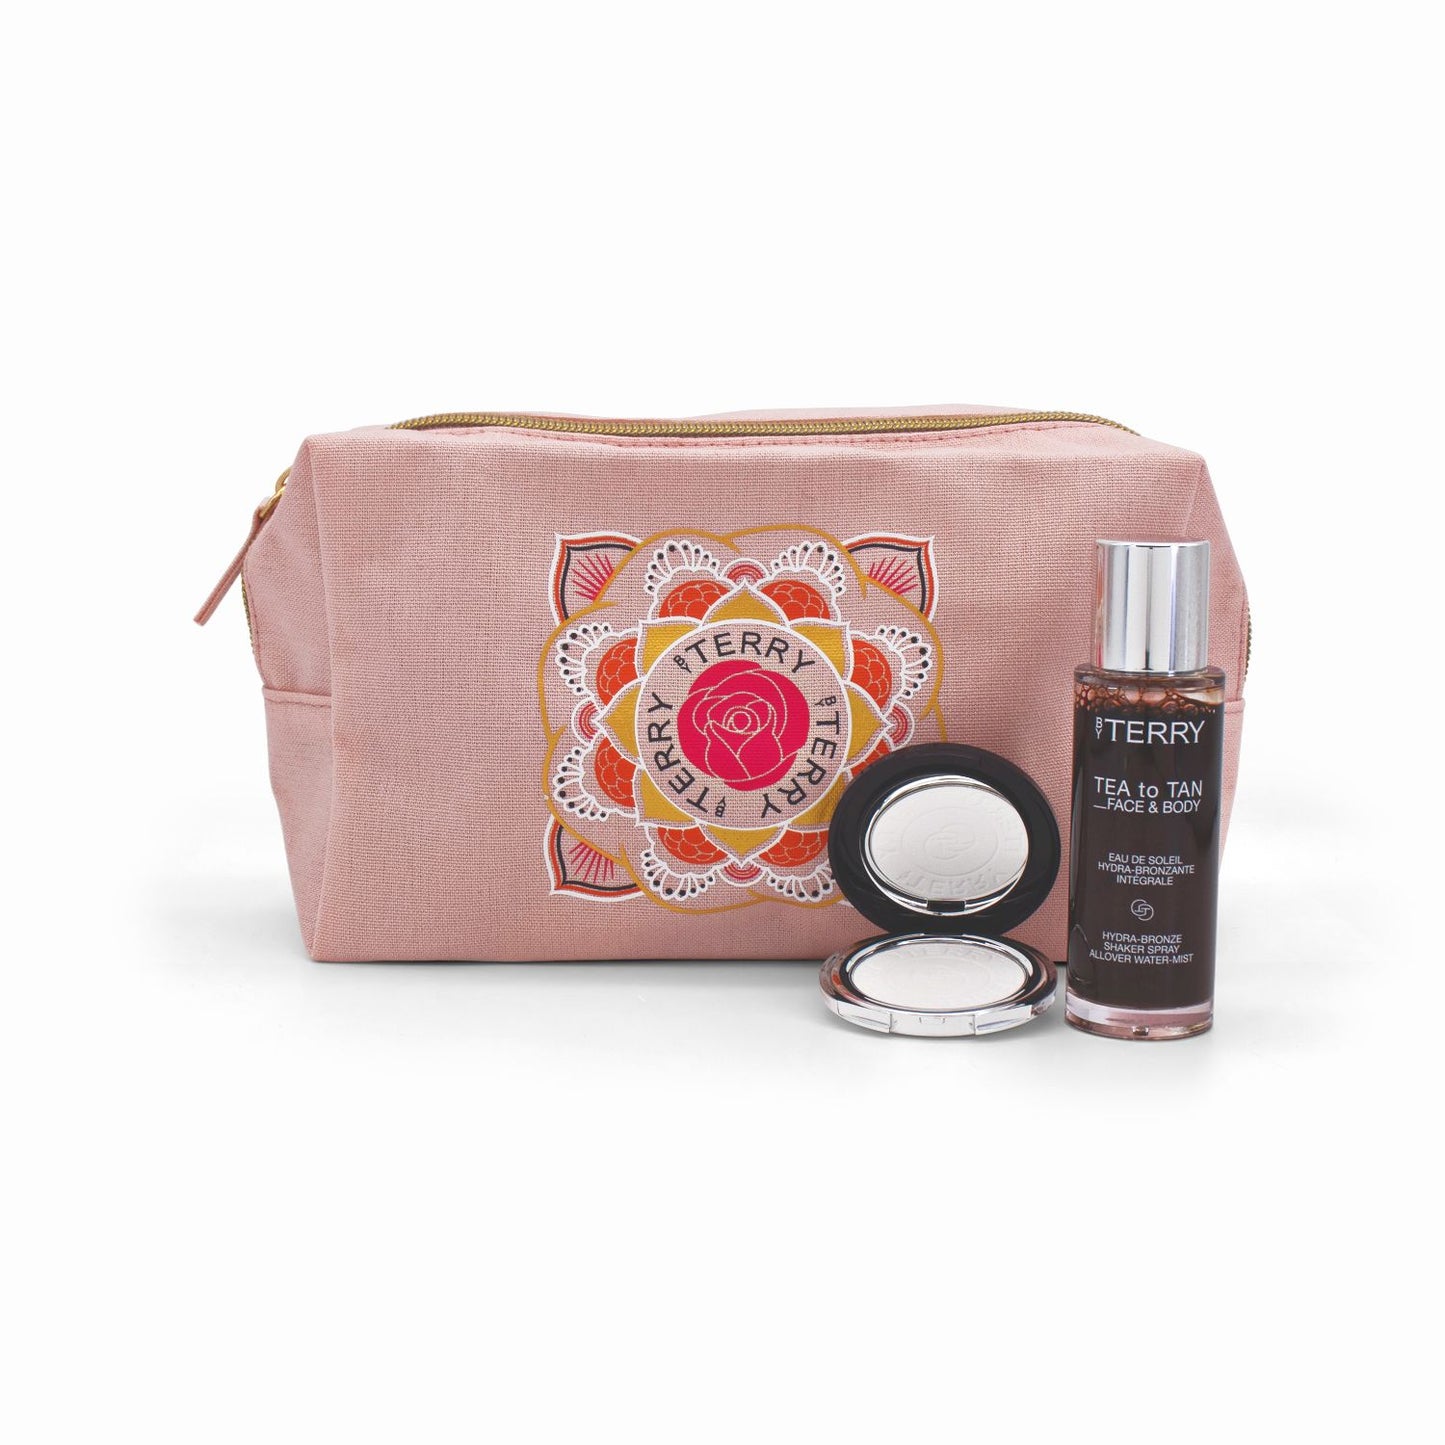 By Terry Mini To Go Tea to Tan and Powder Gift Set With Bag - Imperfect Container